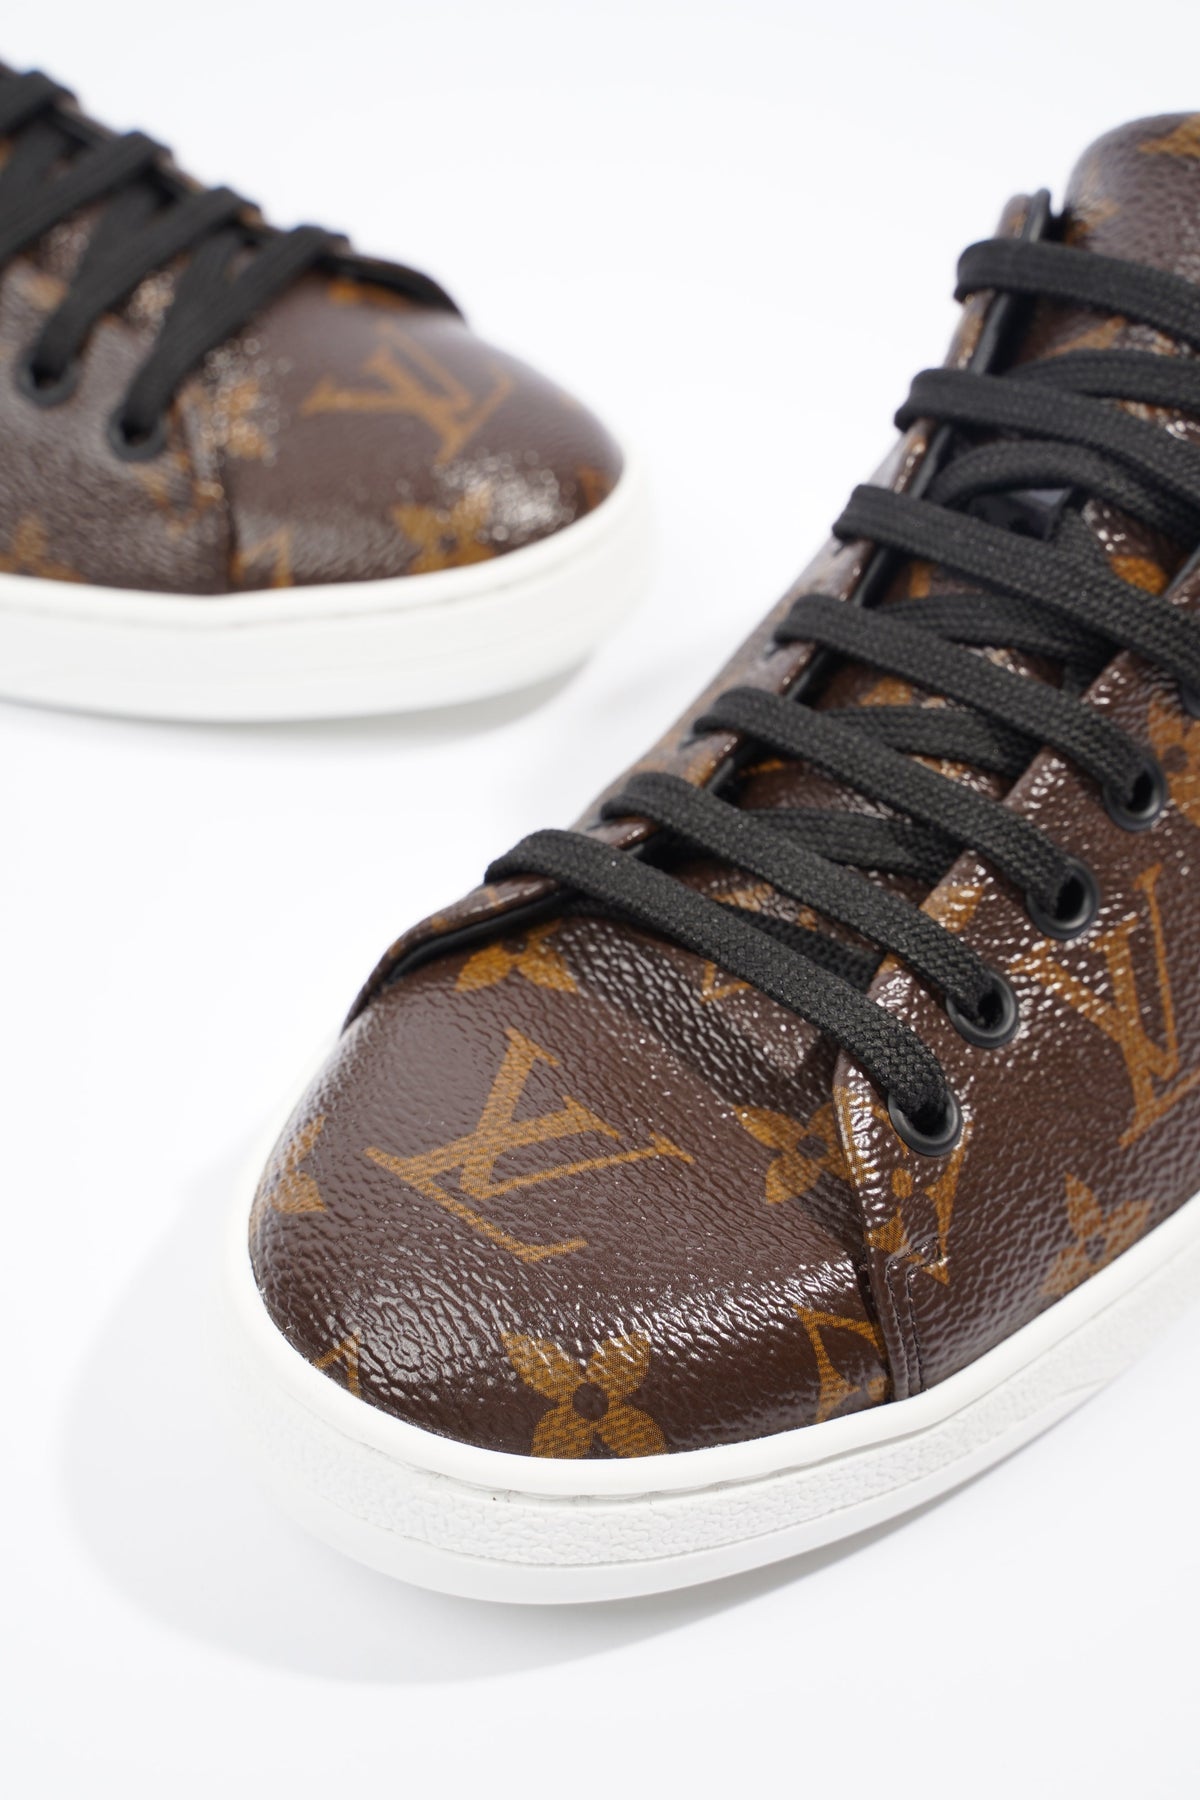 Louis Vuitton Brown Monogram Canvas and Leather Frontrow Low Top Sneakers  Size 40 Louis Vuitton